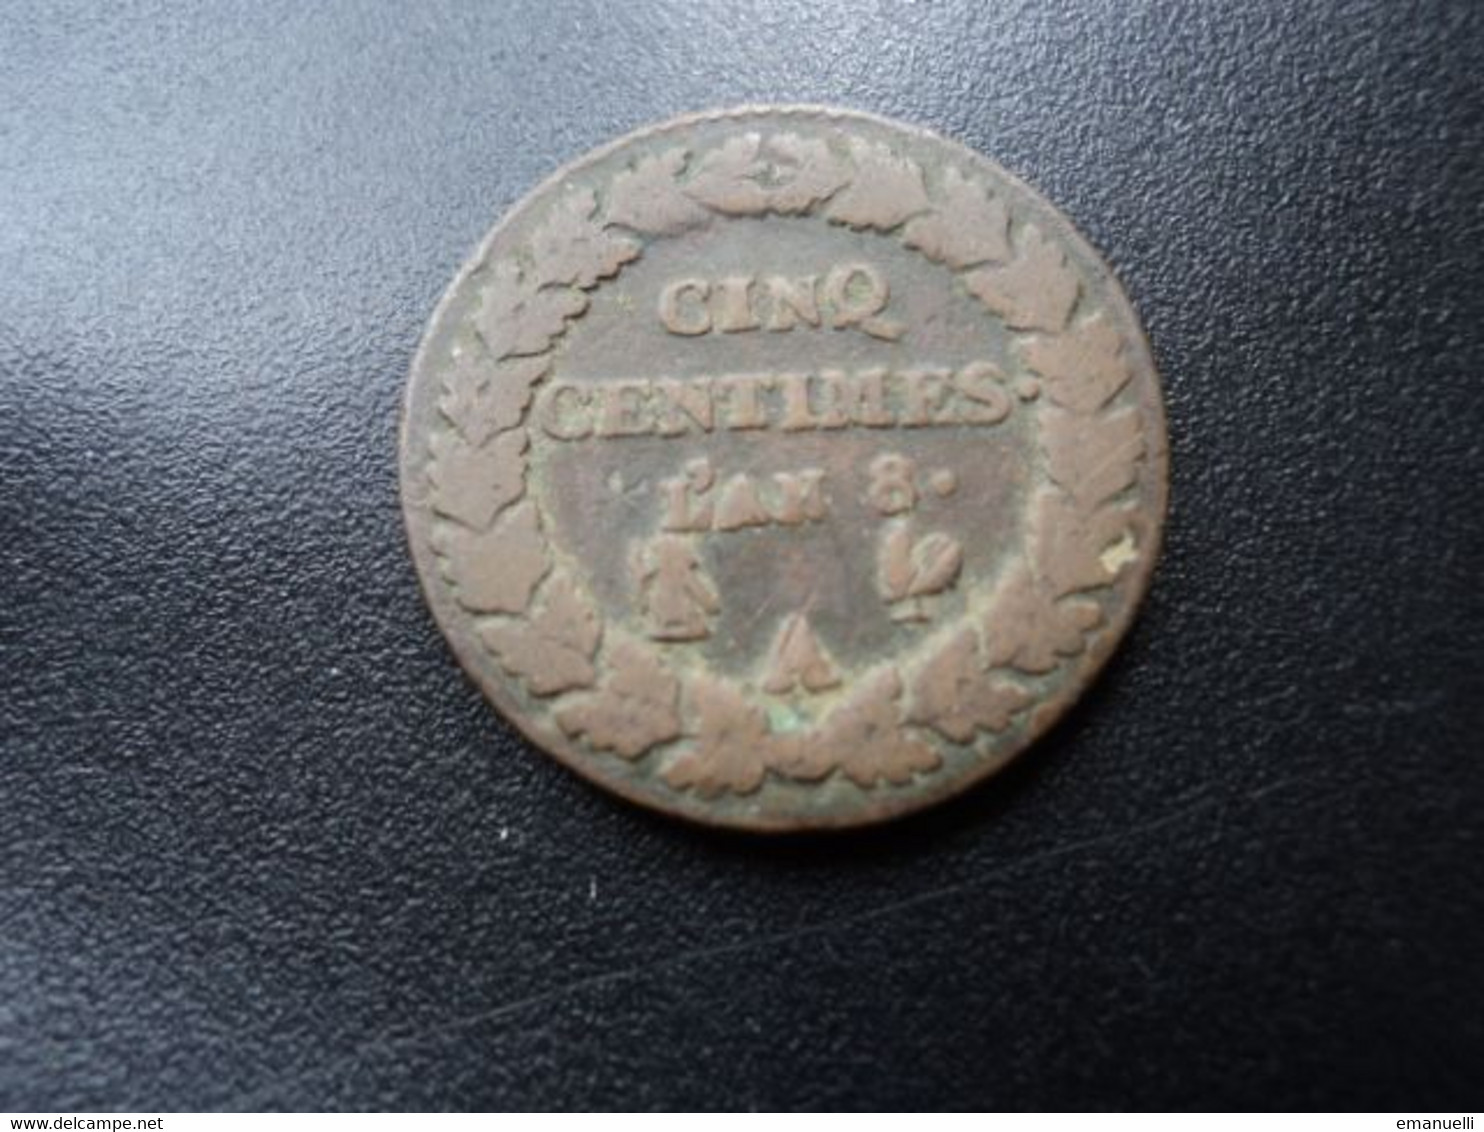 FRANCE : CINQ CENTIMES  L'AN 8 A  *  F.115 / G126a / KM 640.1     TB+ - 1795-1799 French Directory